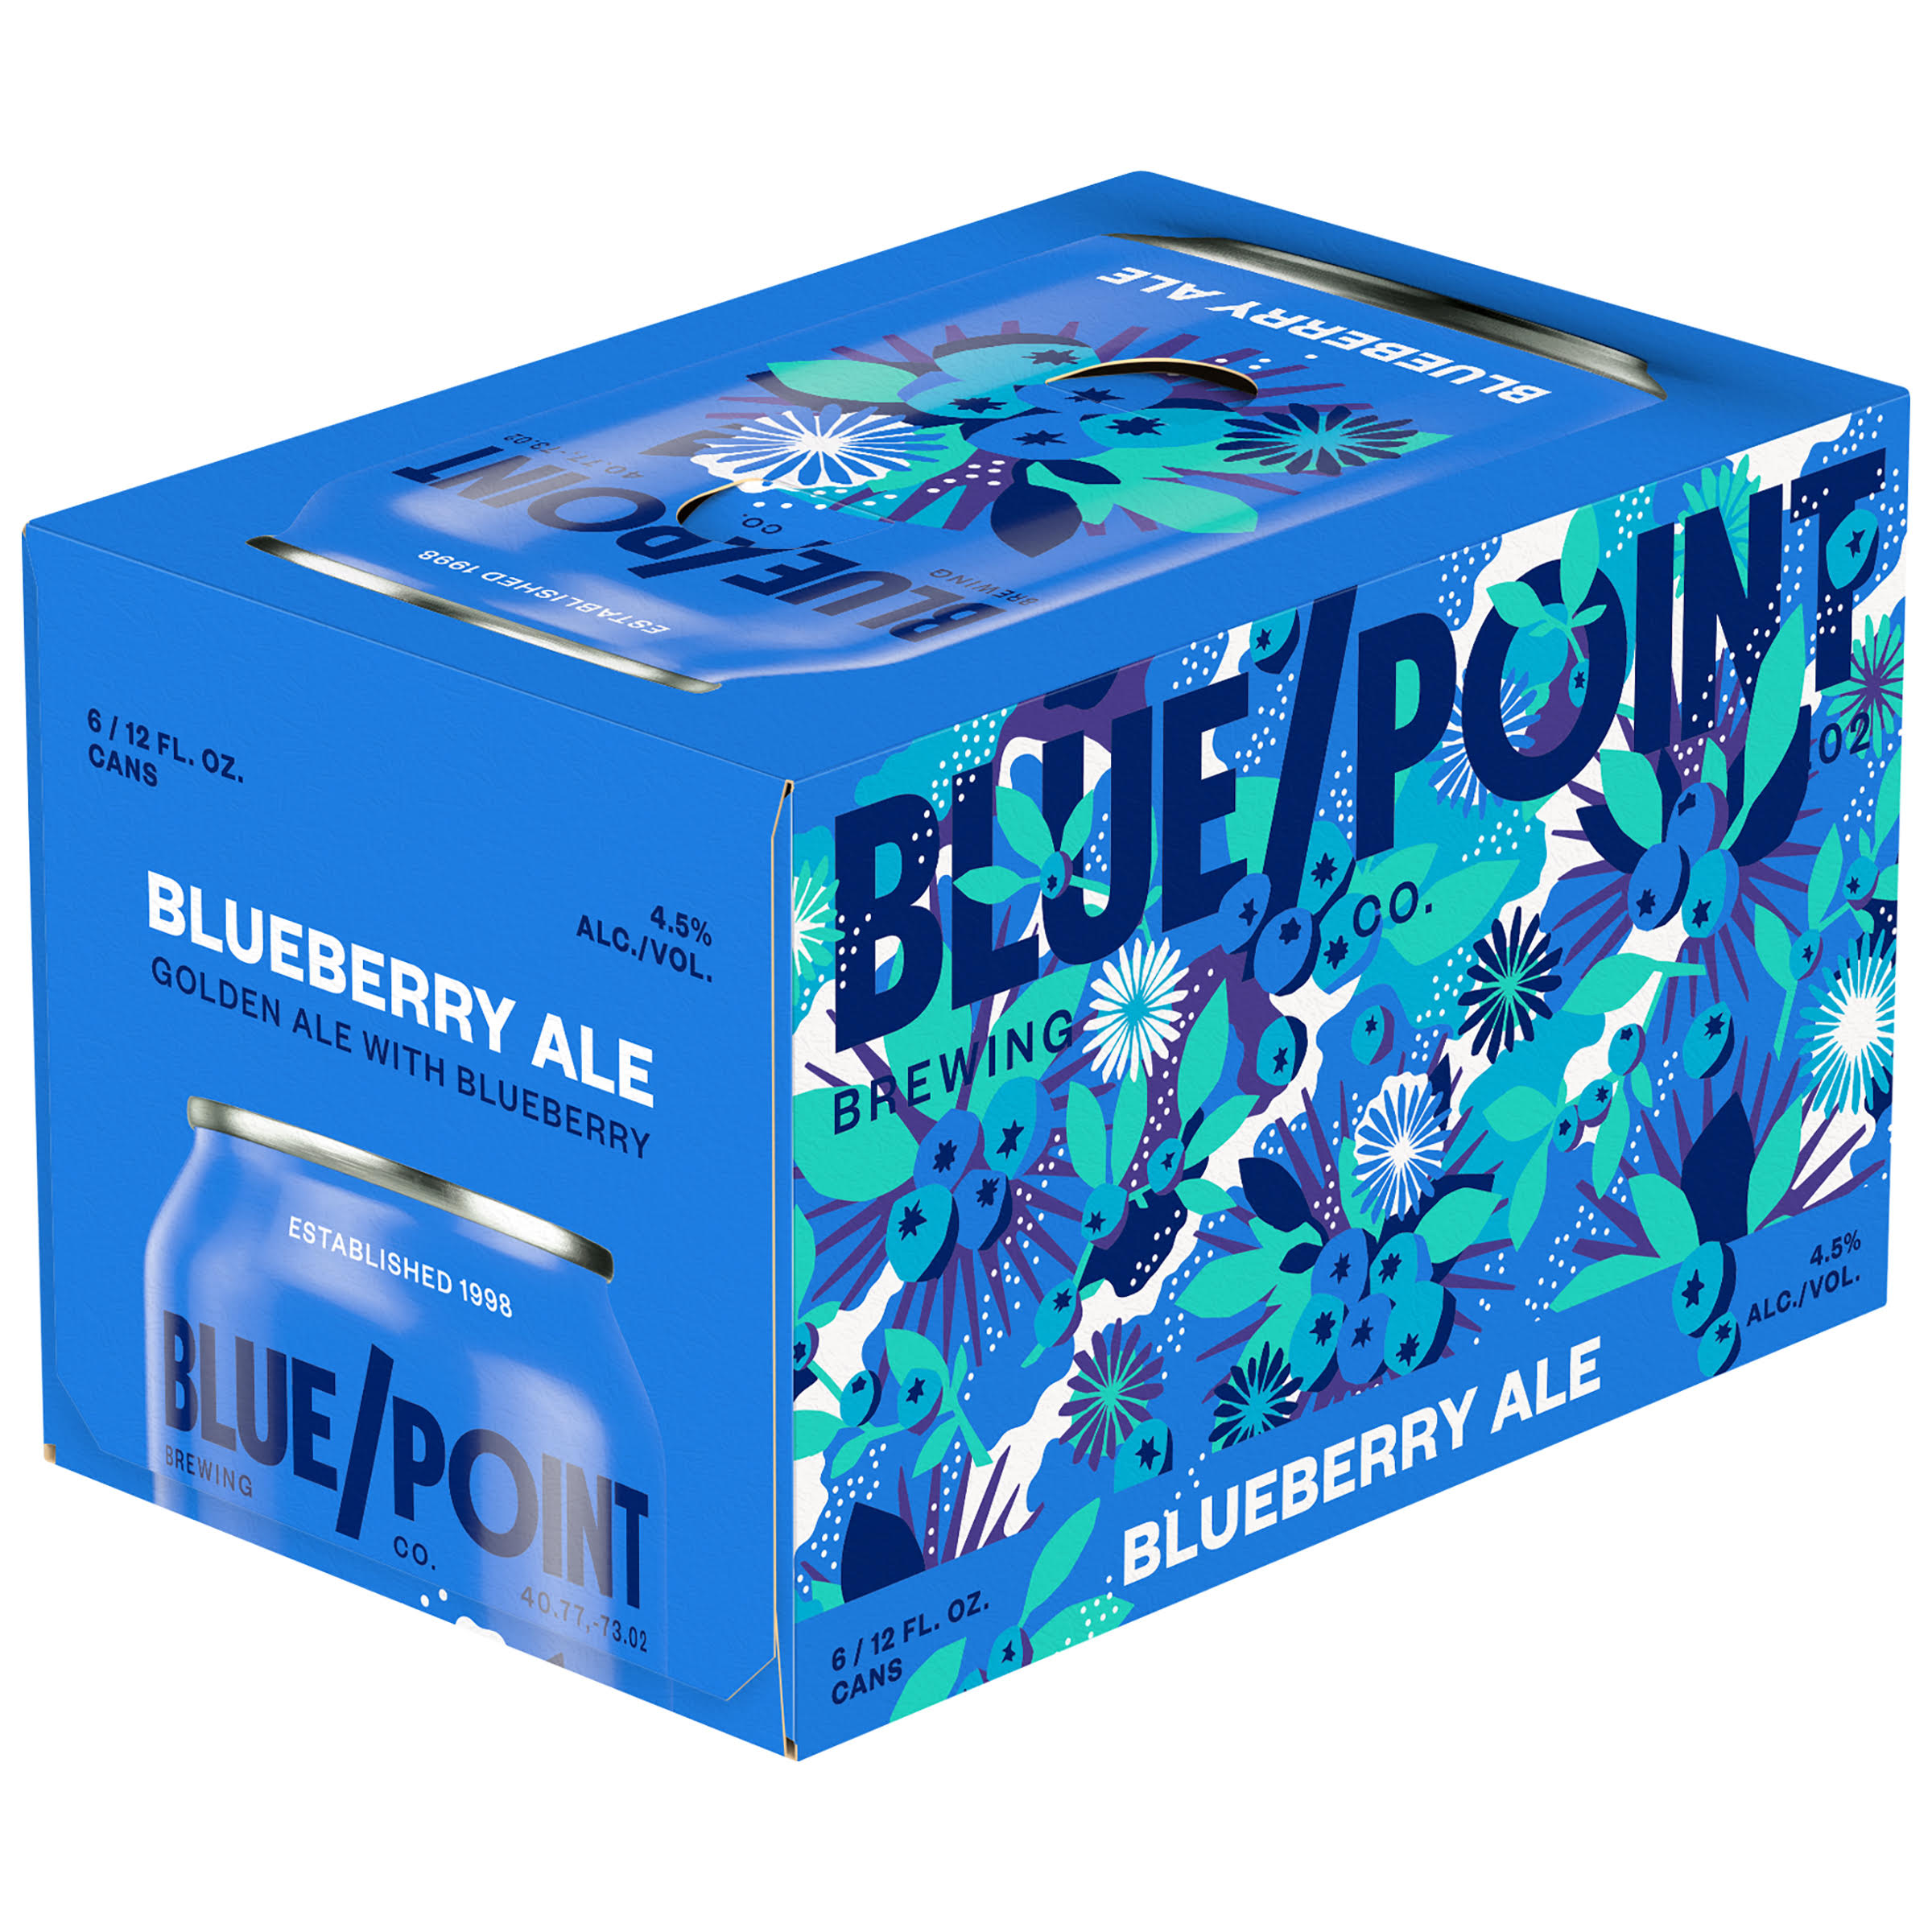 Blue Point Brewing Blueberry Ale Packaging Is Reversing Our Case Of The Blu...